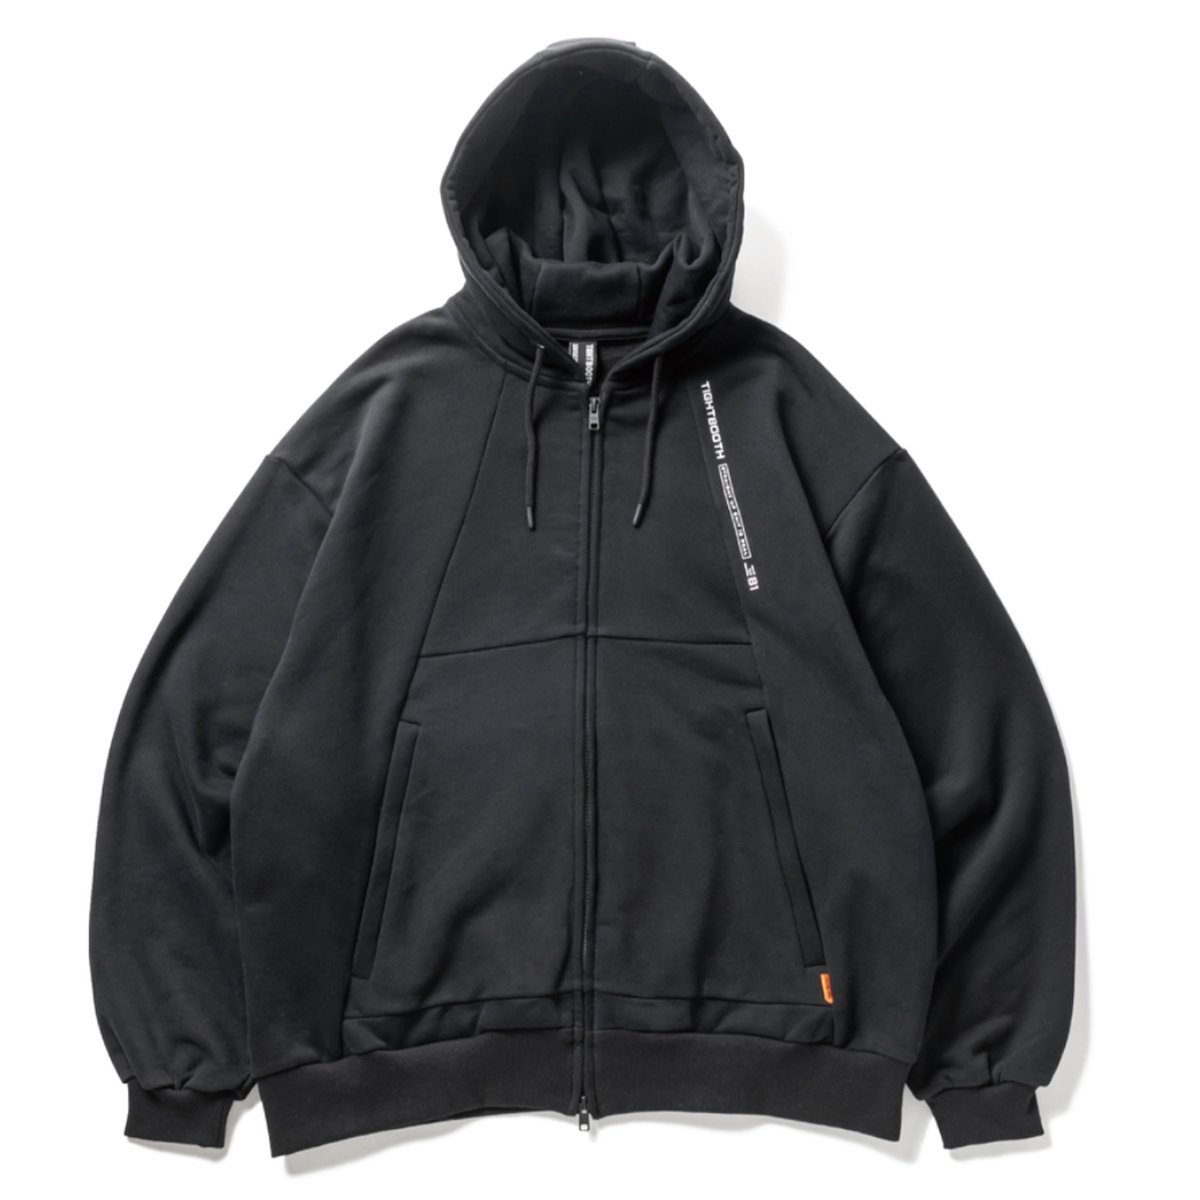 <img class='new_mark_img1' src='https://img.shop-pro.jp/img/new/icons8.gif' style='border:none;display:inline;margin:0px;padding:0px;width:auto;' />:【TIGHTBOOTH】Pyramid Zip Hoodie (Black)
                          </a>
            <span class=